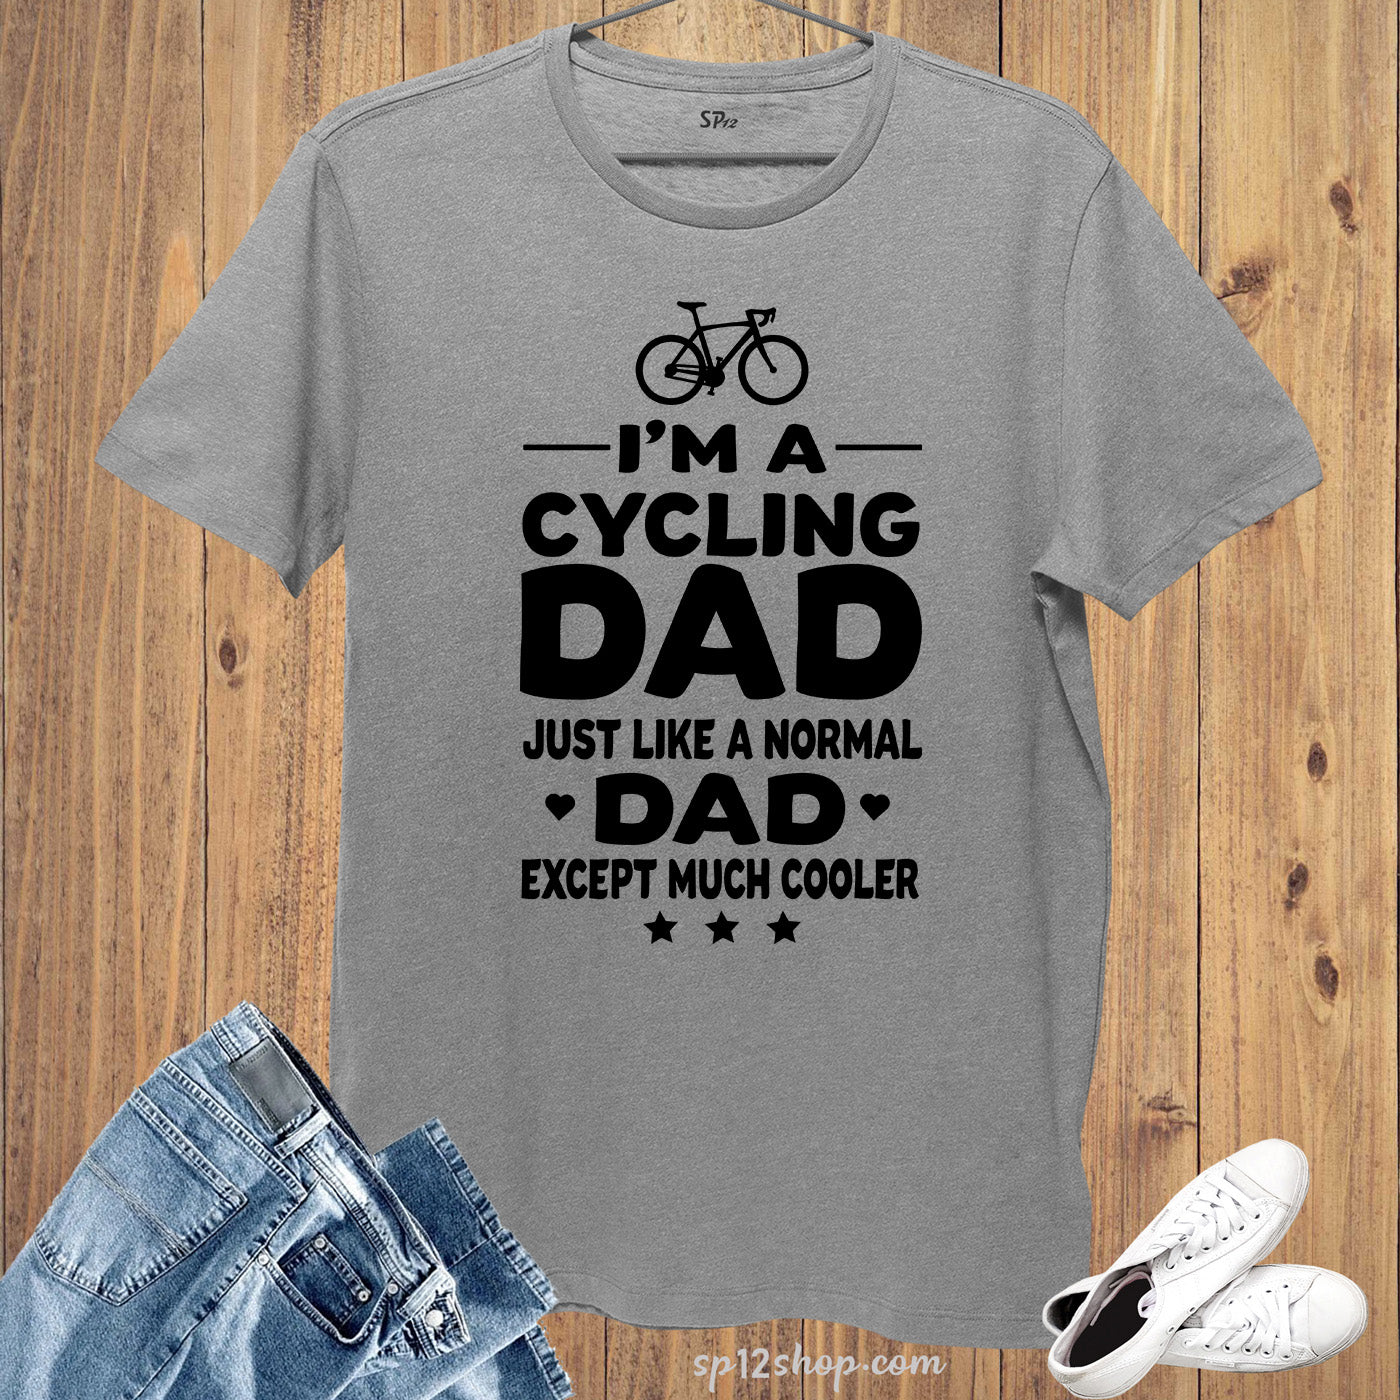 I'M a Cycling Dad Just Like a Normal Dad Except Much Cooler T Shirt